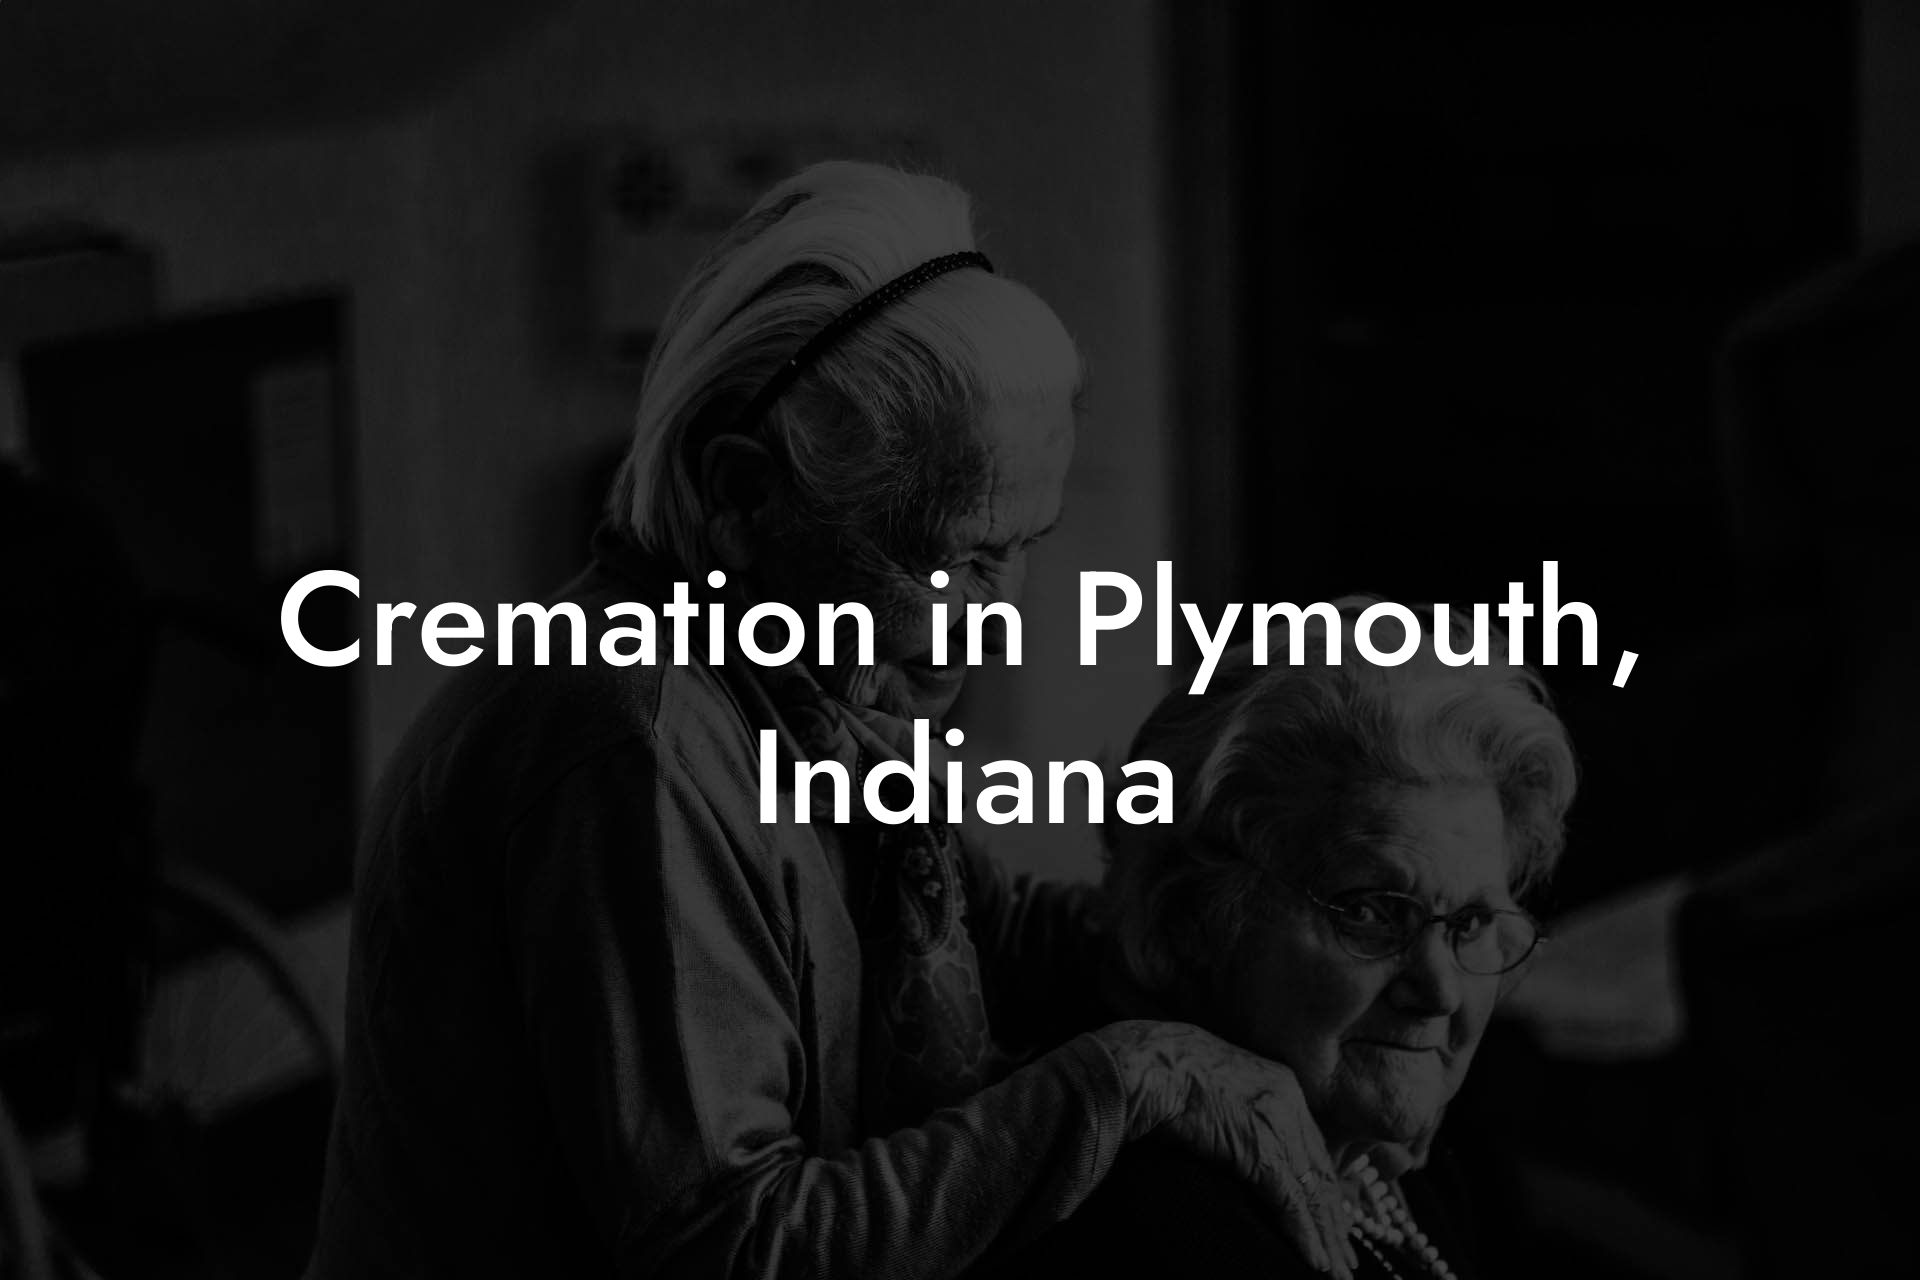 Cremation in Plymouth, Indiana